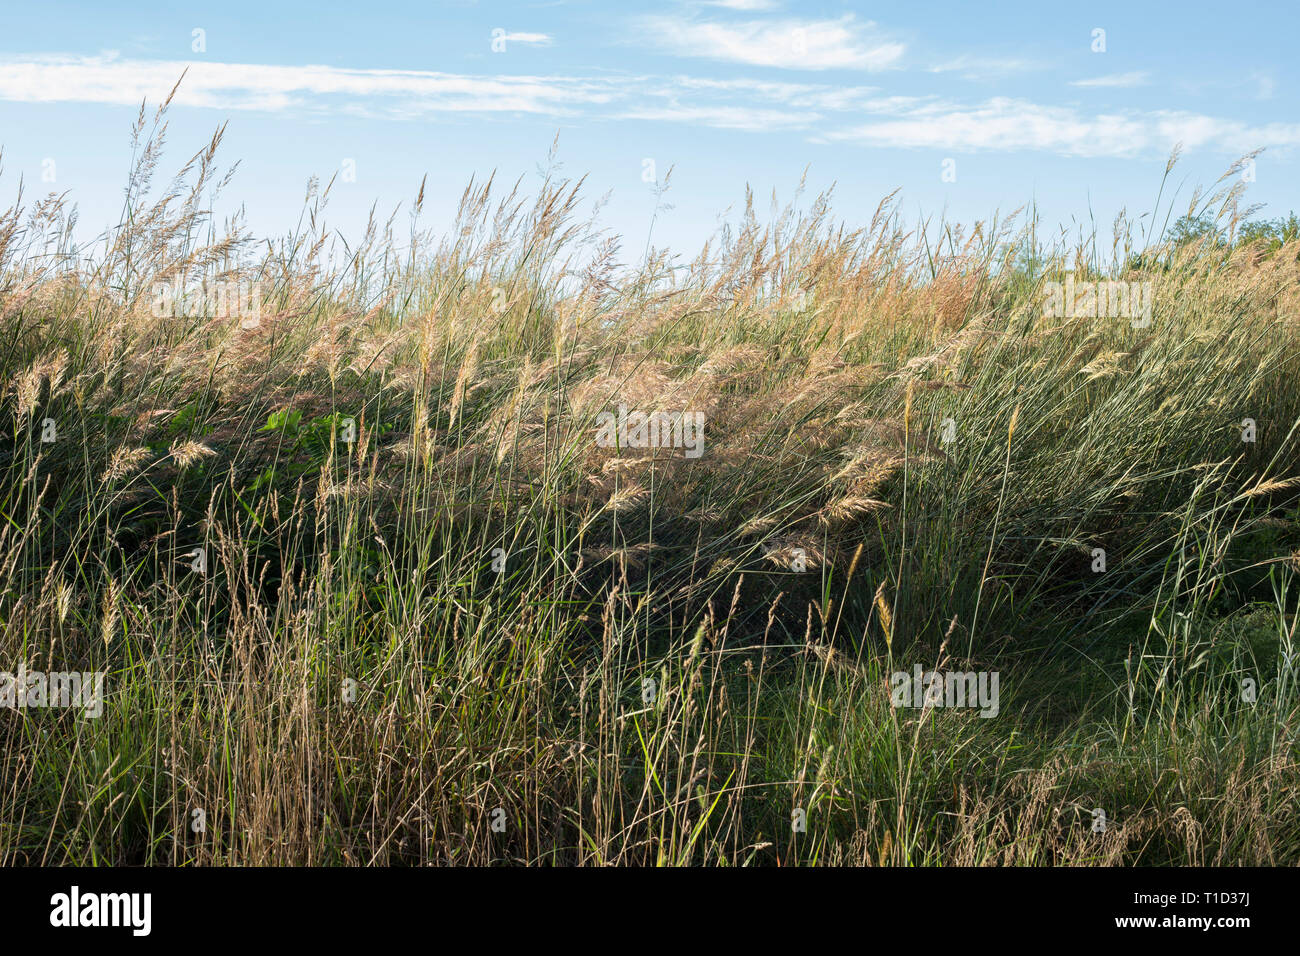 Tall Grasses Blowing in Wind on Sunny Day Stock Photo